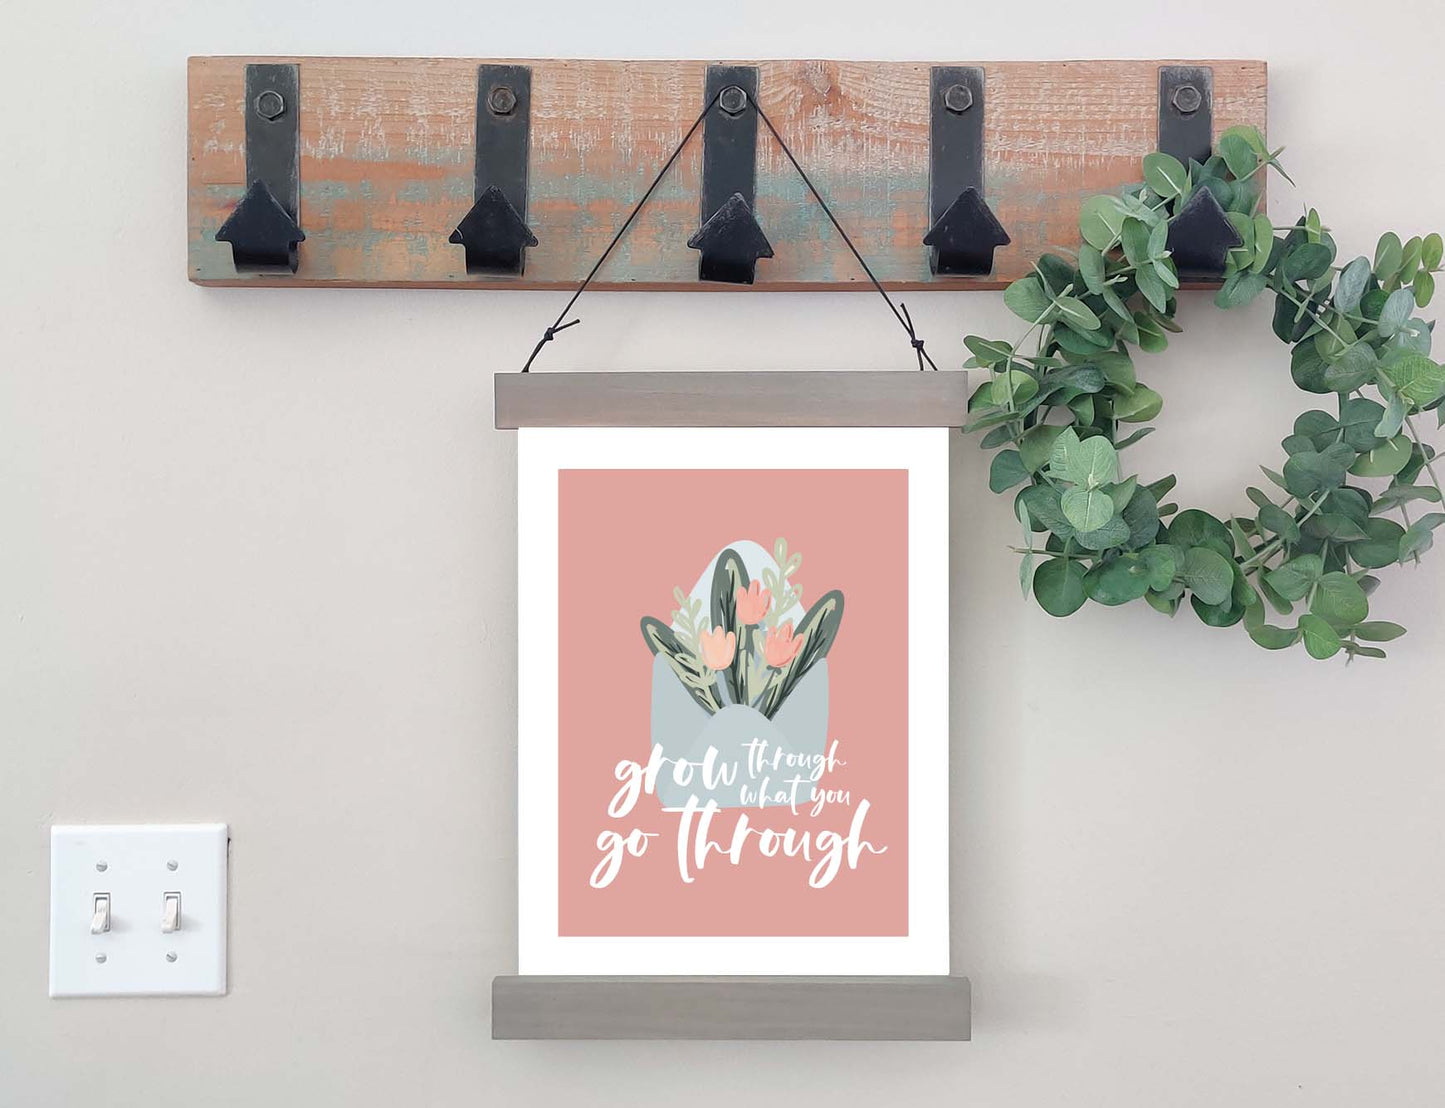 Magnetic Wall Hanging Insert: Grow Through What You Go Through (Spring) | INSERT ONLY